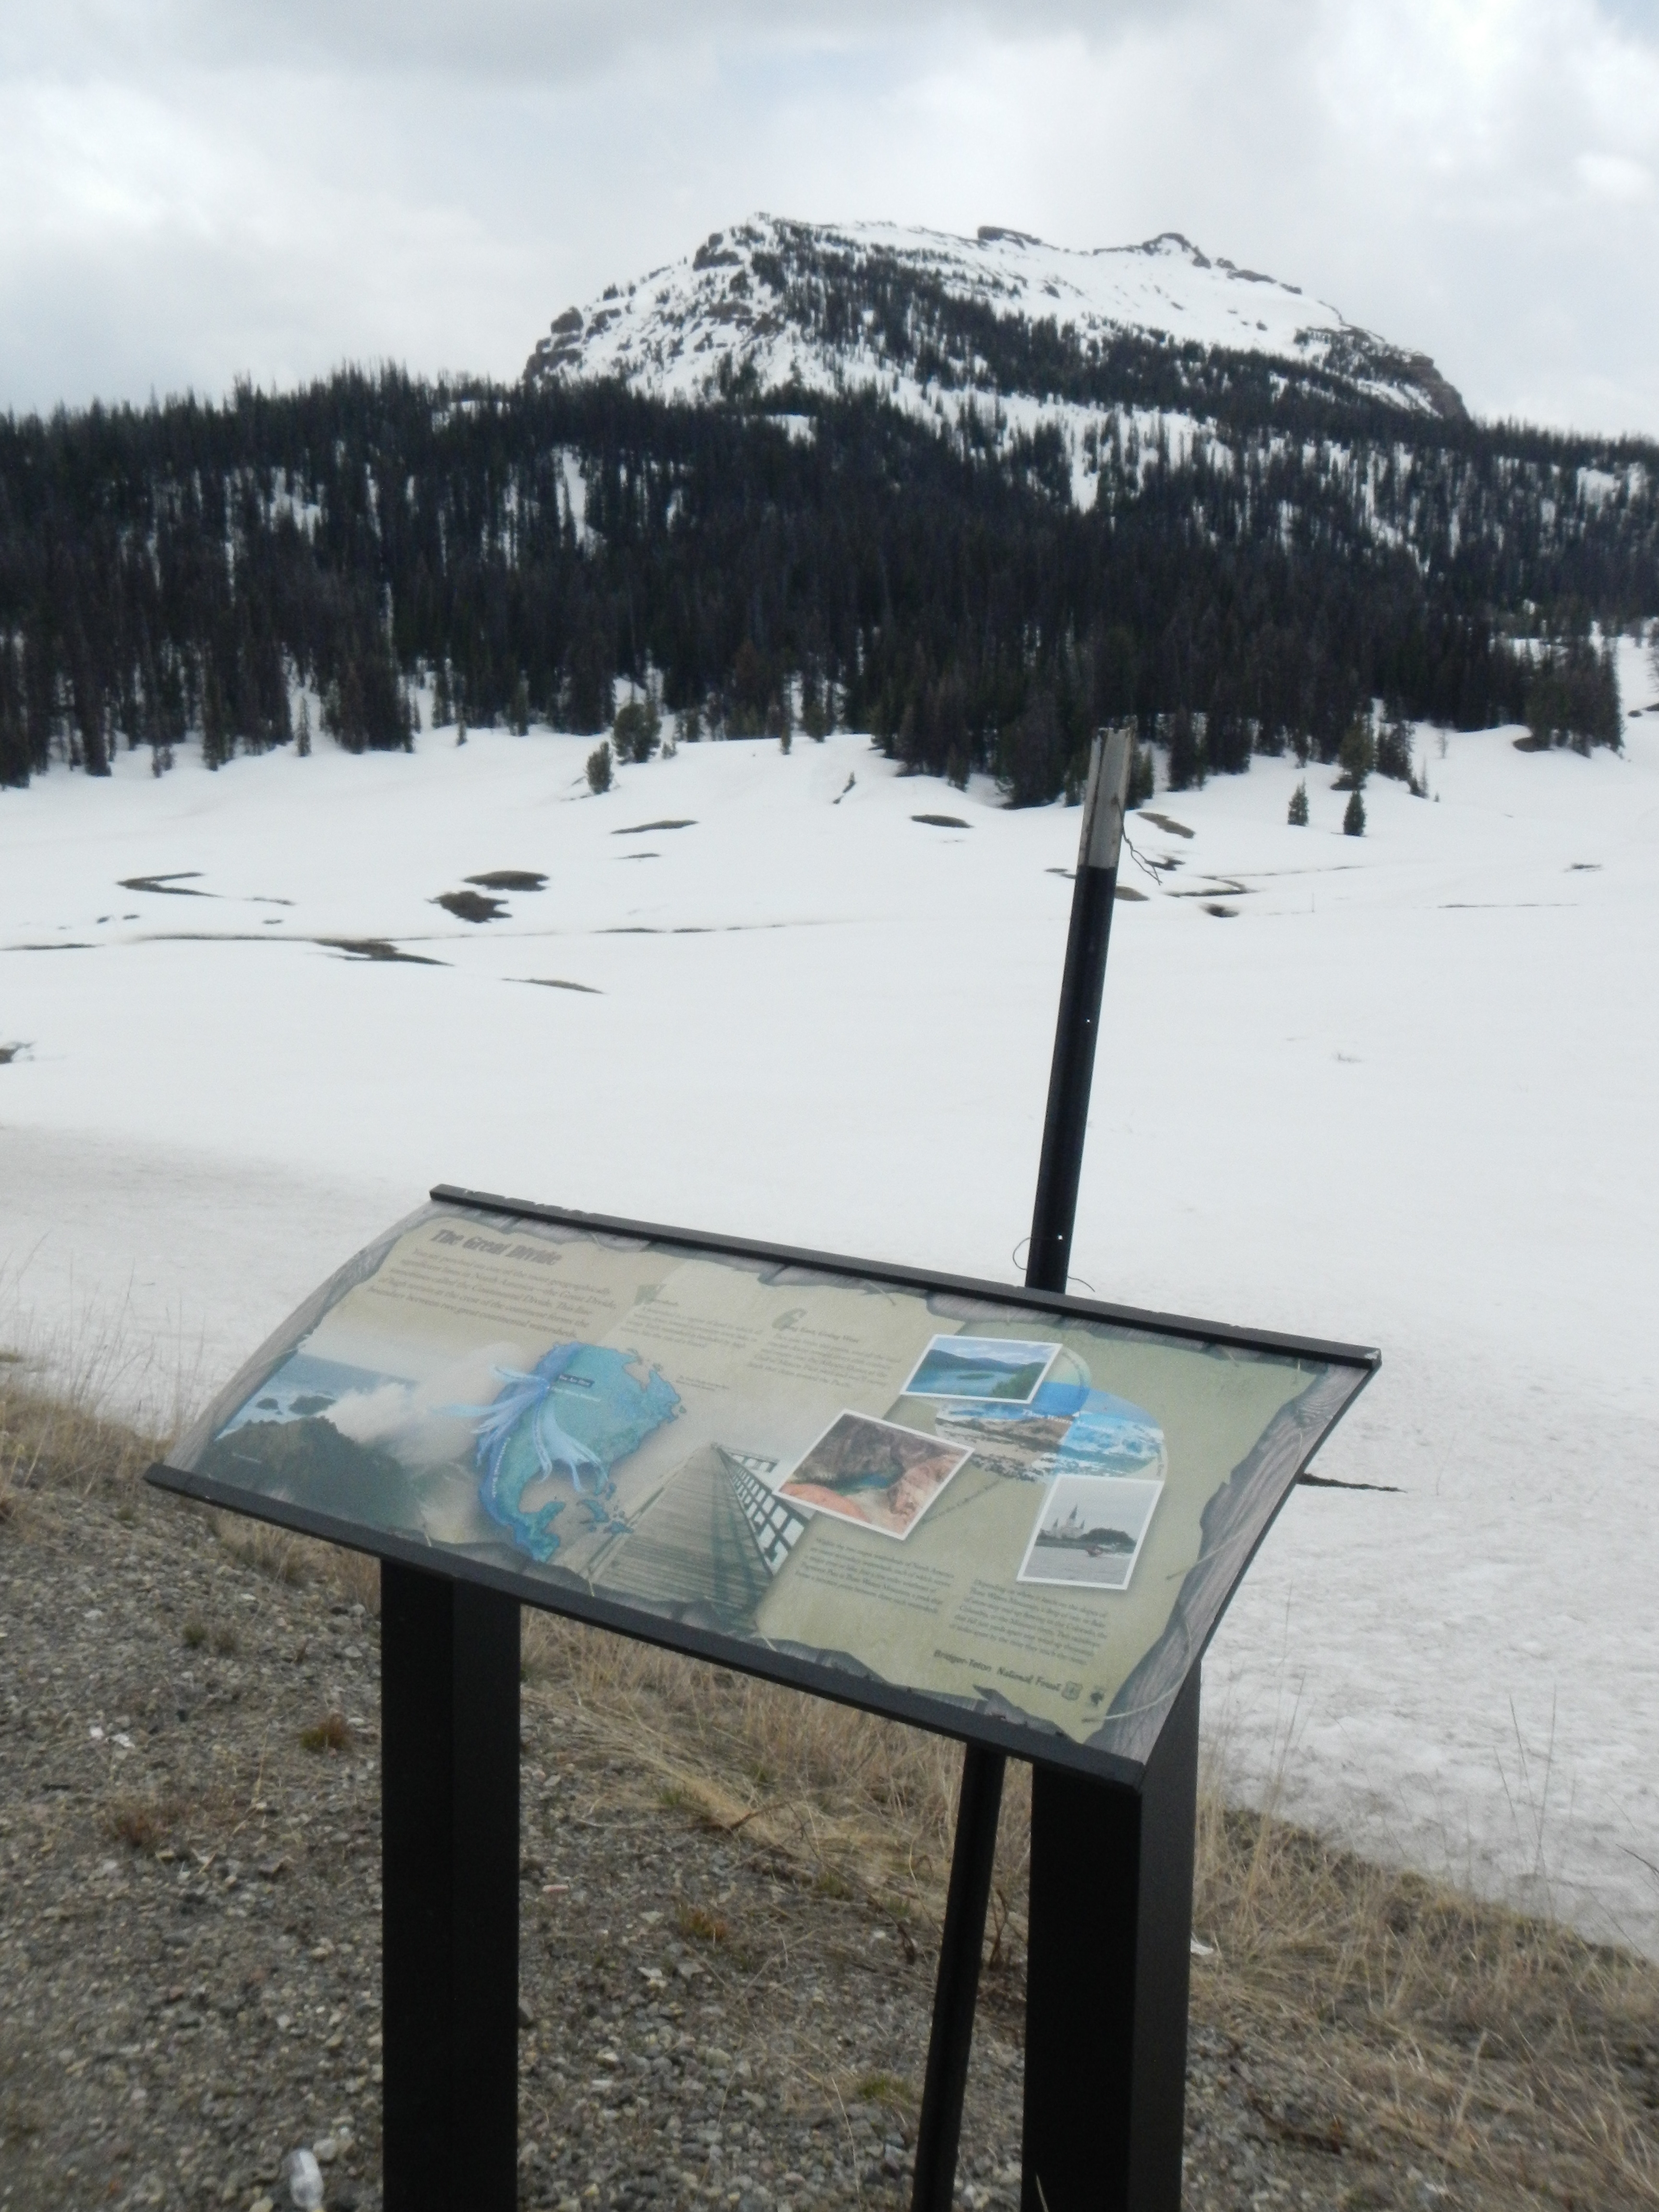 The Great Divide Marker and Togwotee Pass